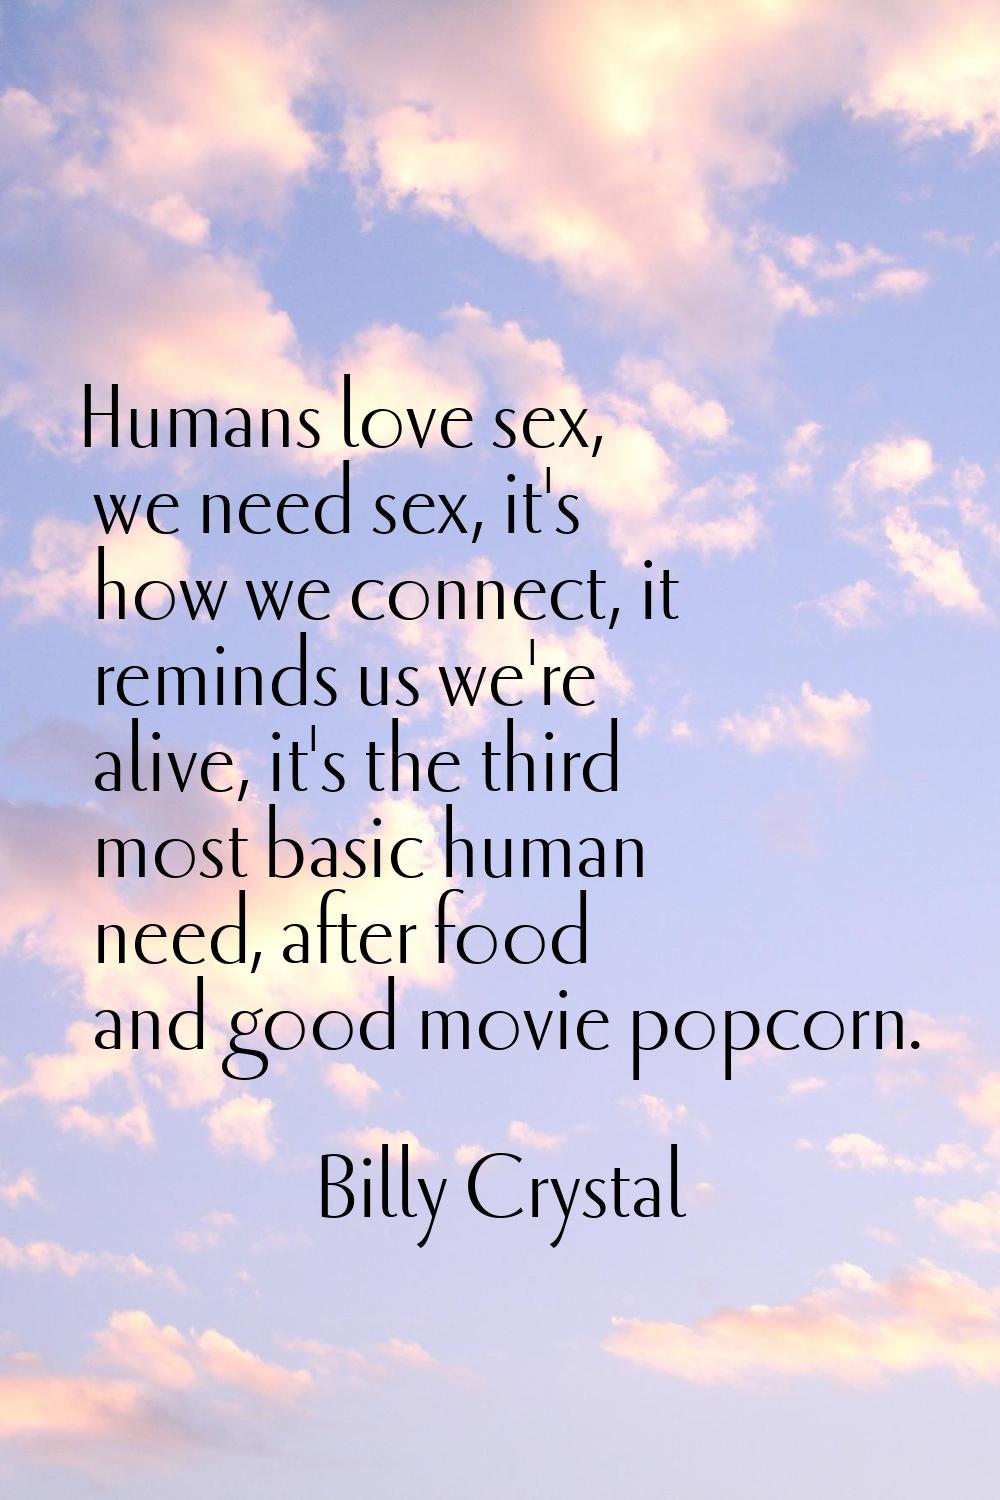 Humans love sex, we need sex, it's how we connect, it reminds us we're alive, it's the third most b